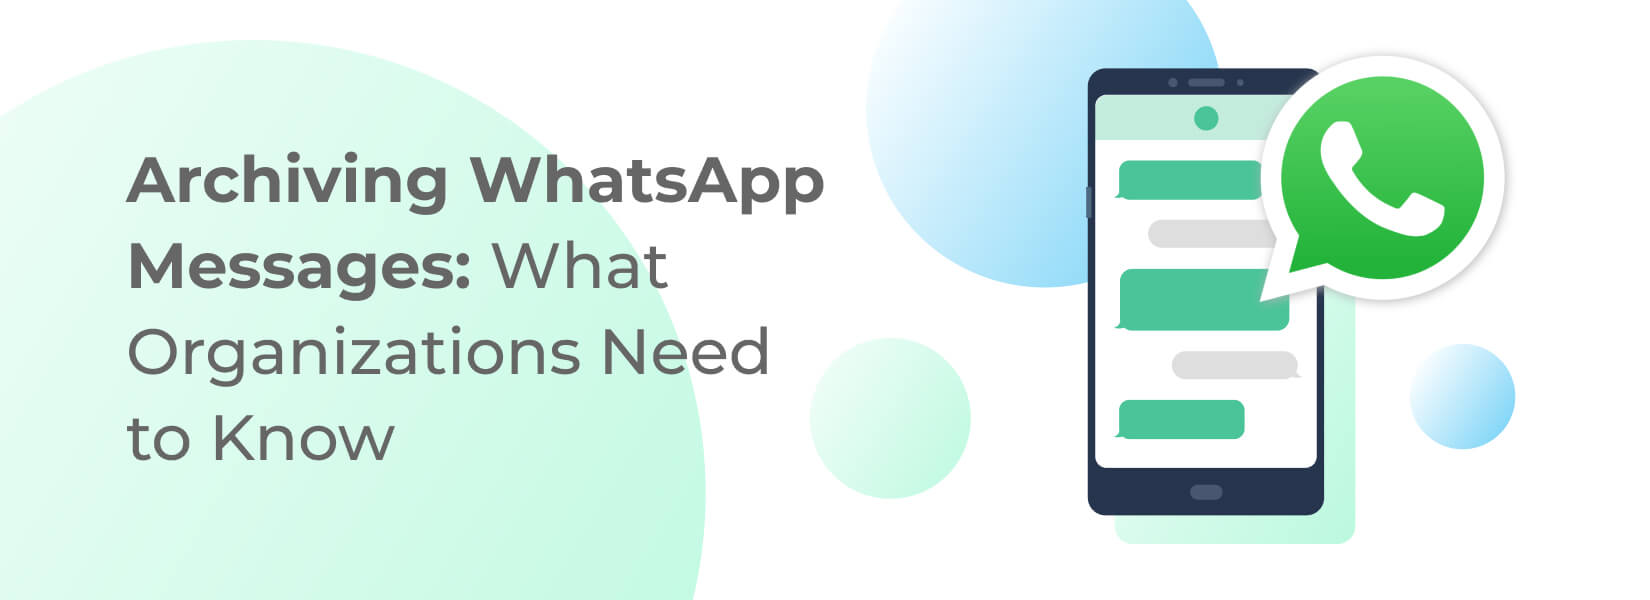 Archiving WhatsApp Messages: What Organizations Need to Know